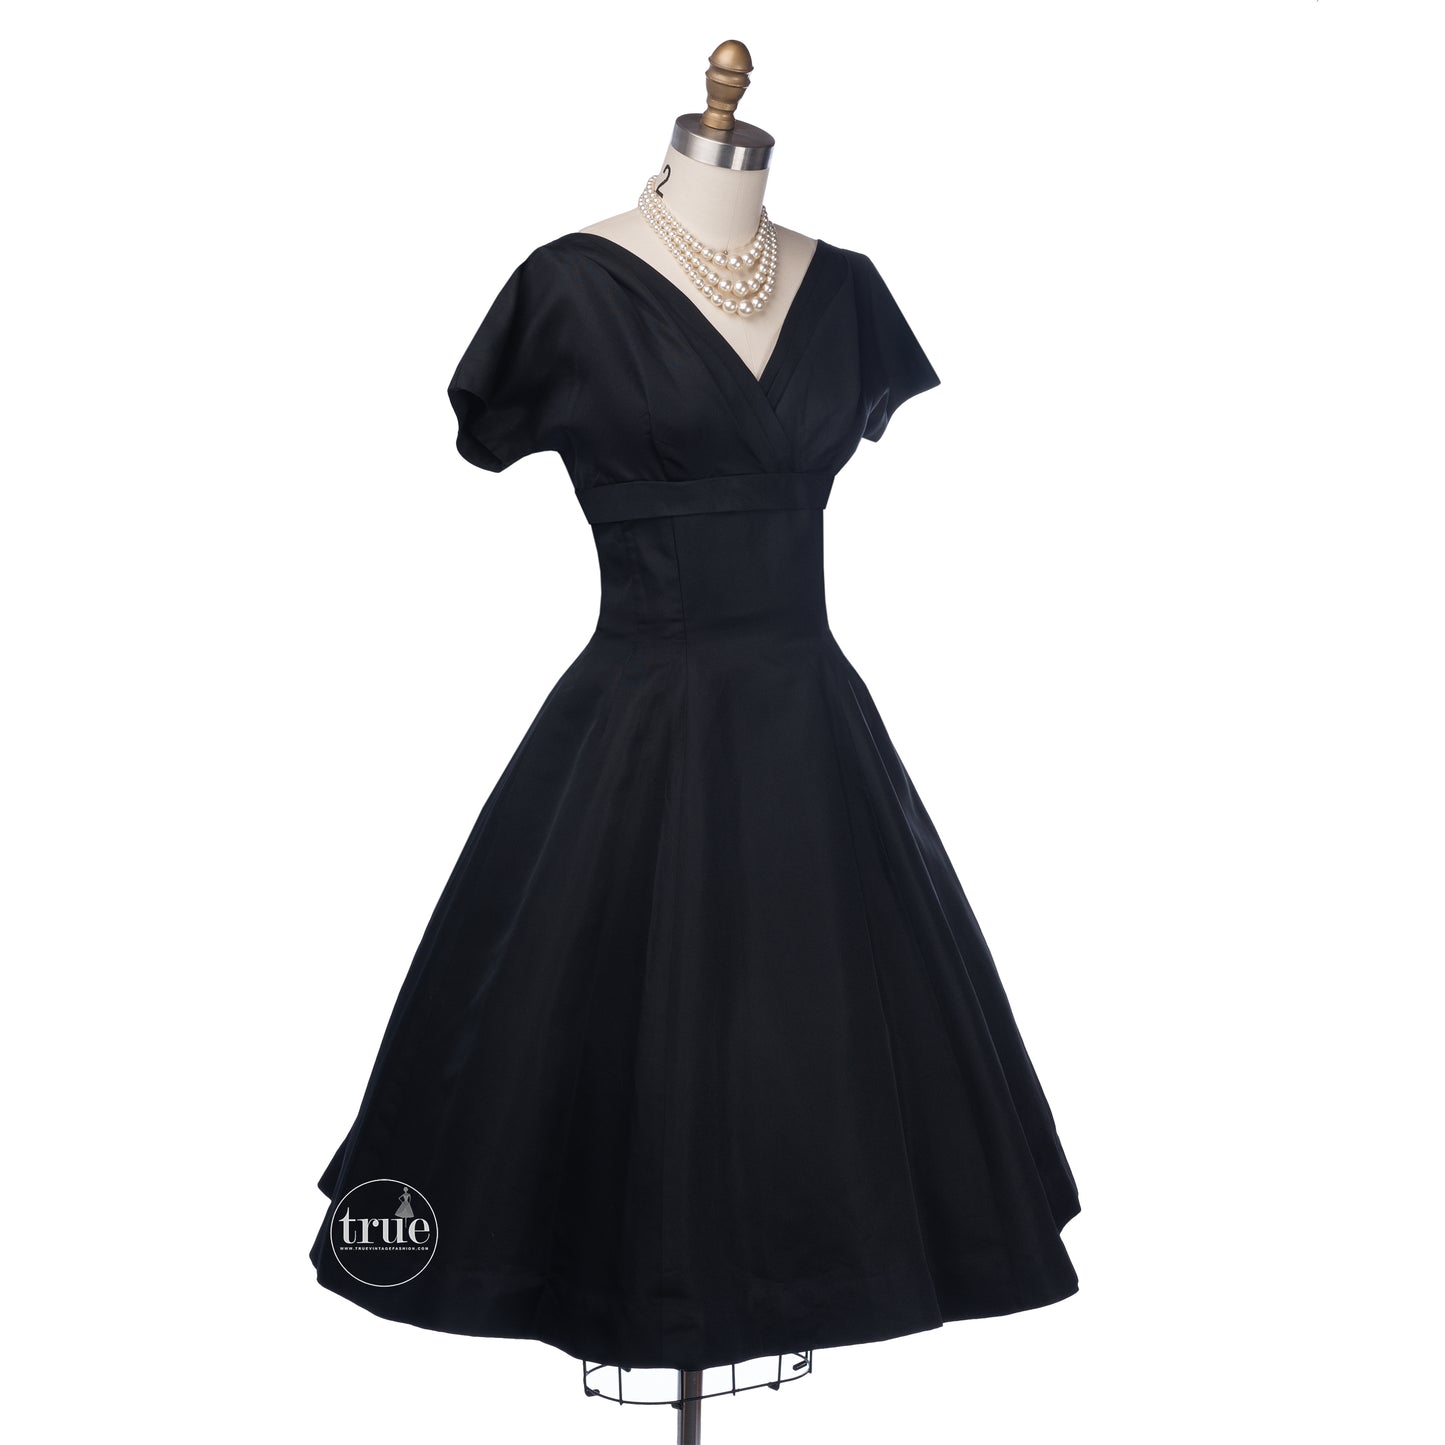 vintage 1950's dress ...simple elegance Madeleine Fauth black full skirt dress with streaming bow